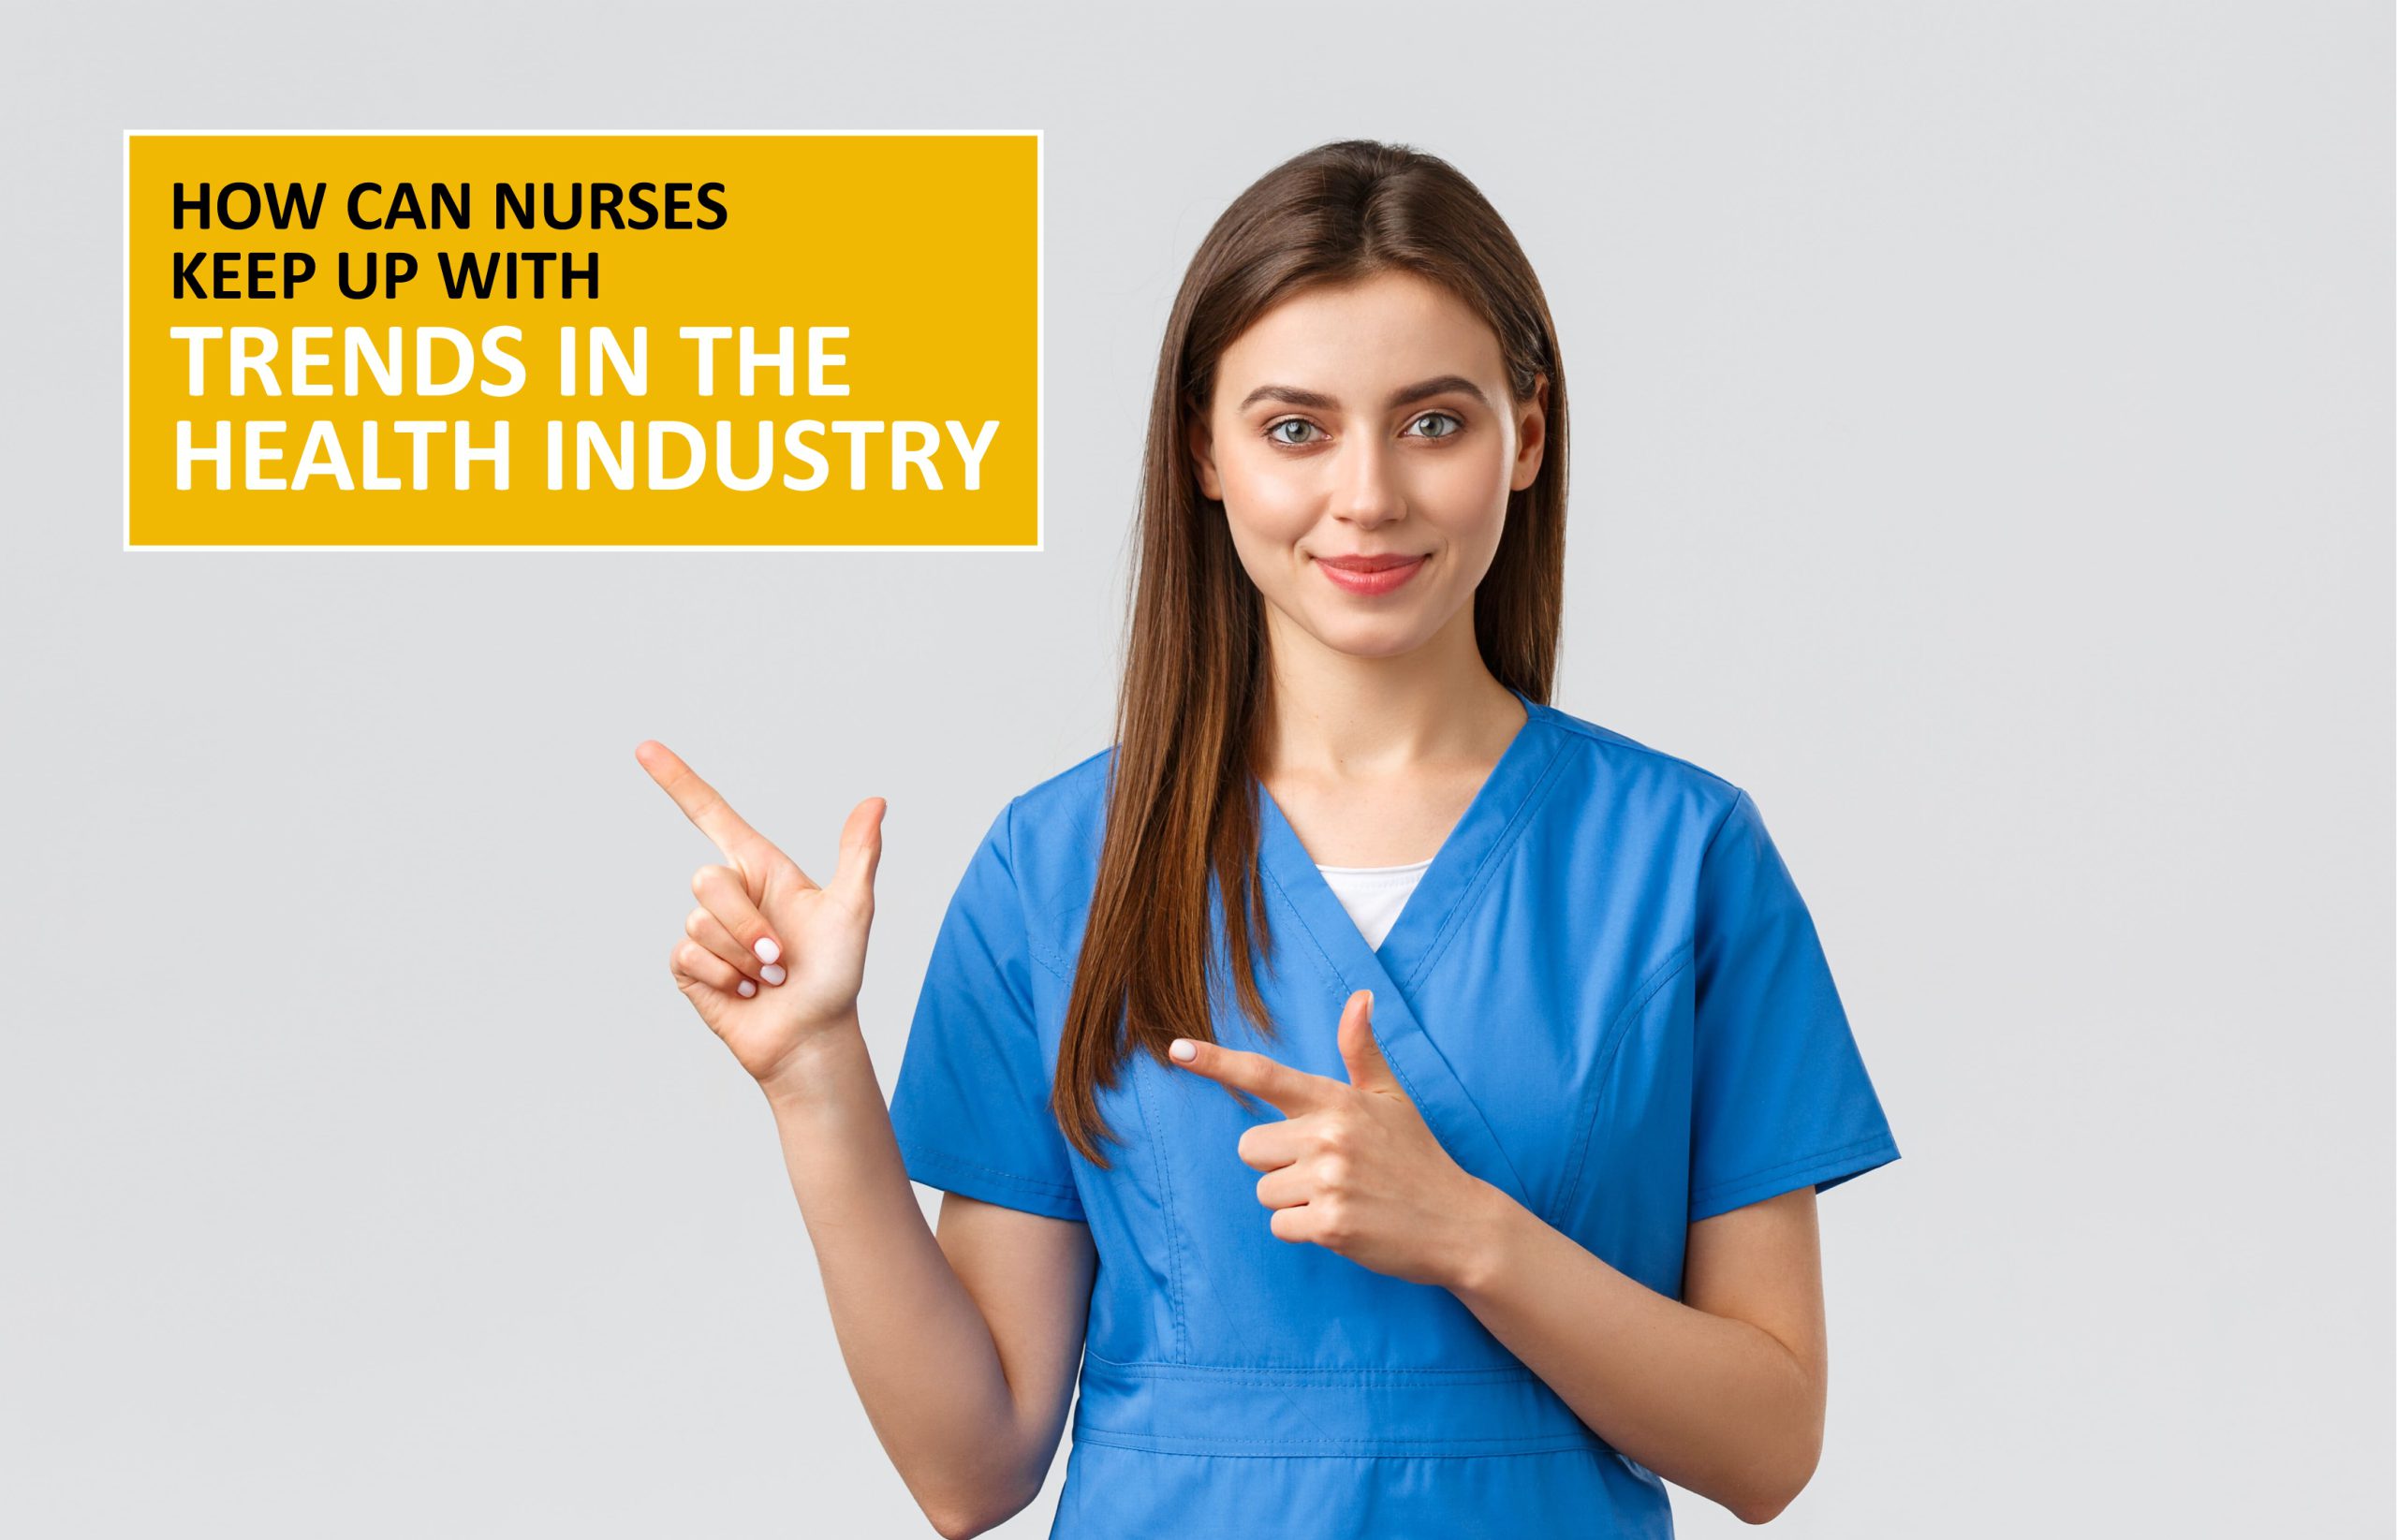 How Can Nurses Keep Up with Trends in the Health Industry?